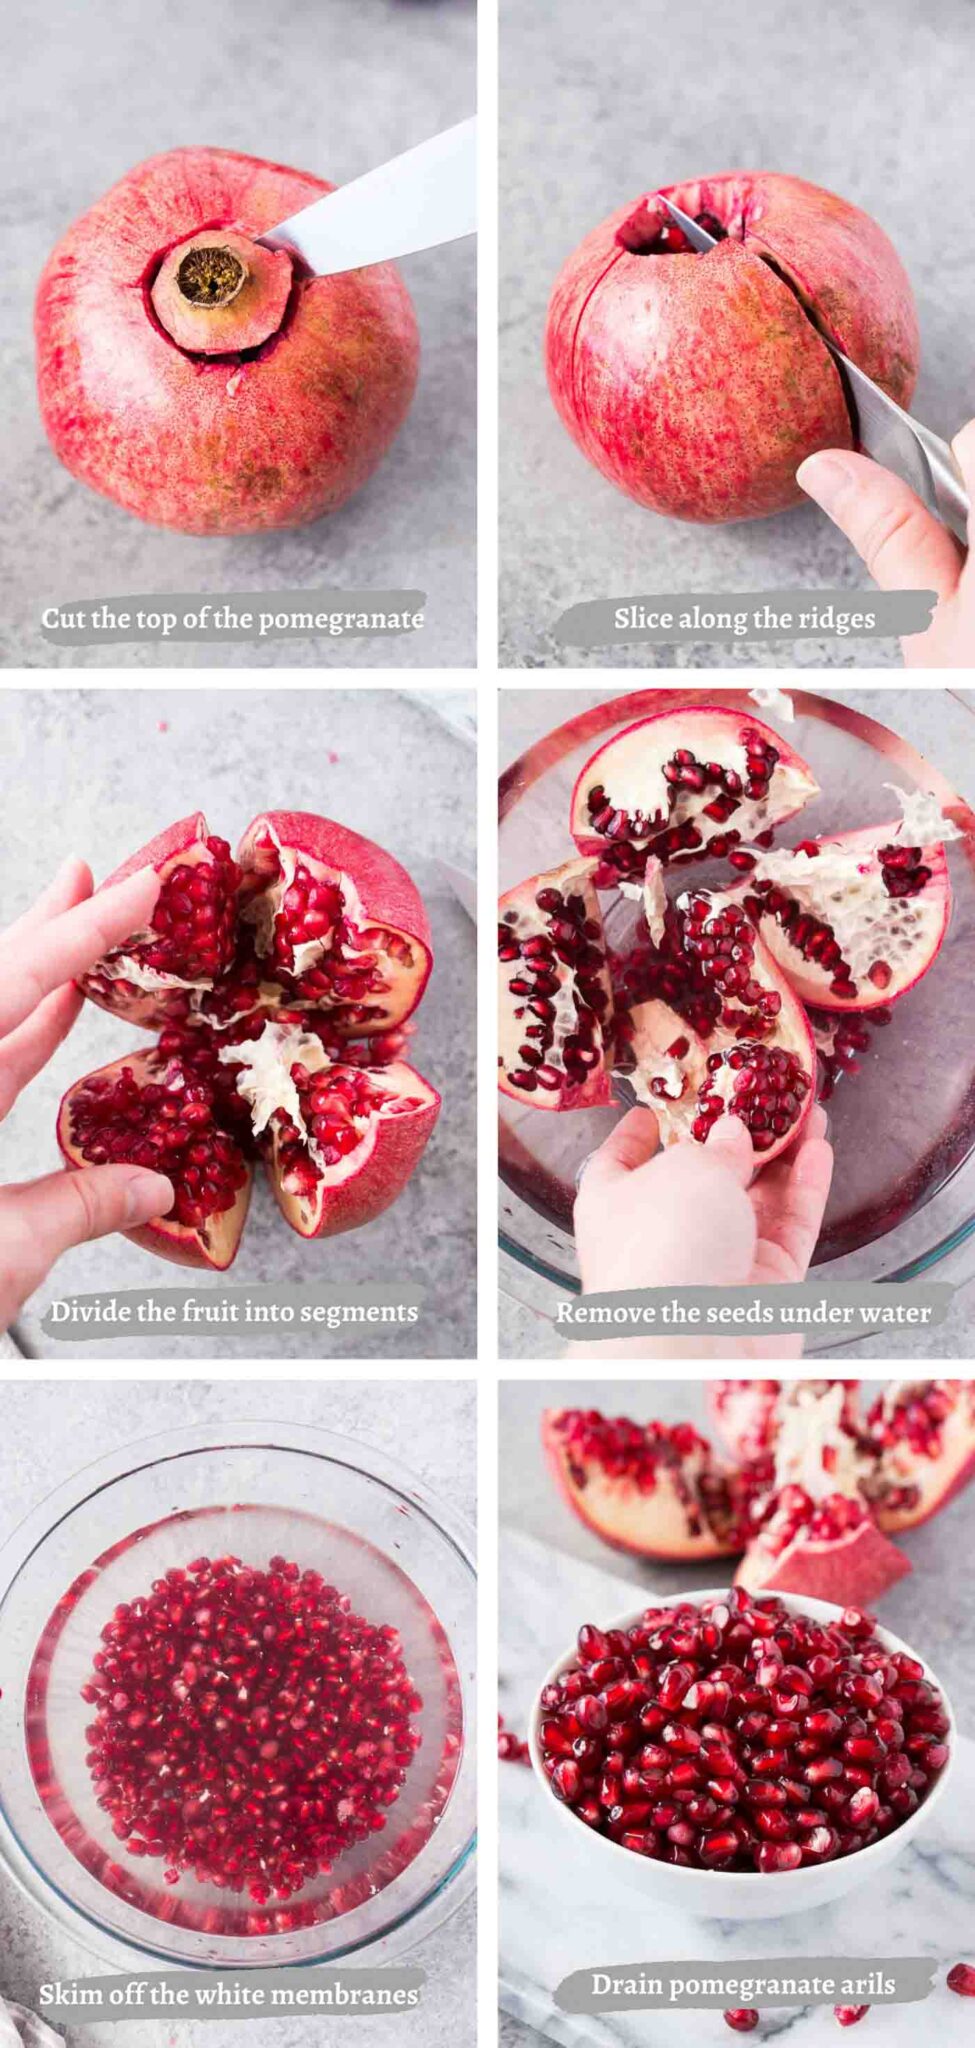 process images of cutting and deseeding a pomegranate